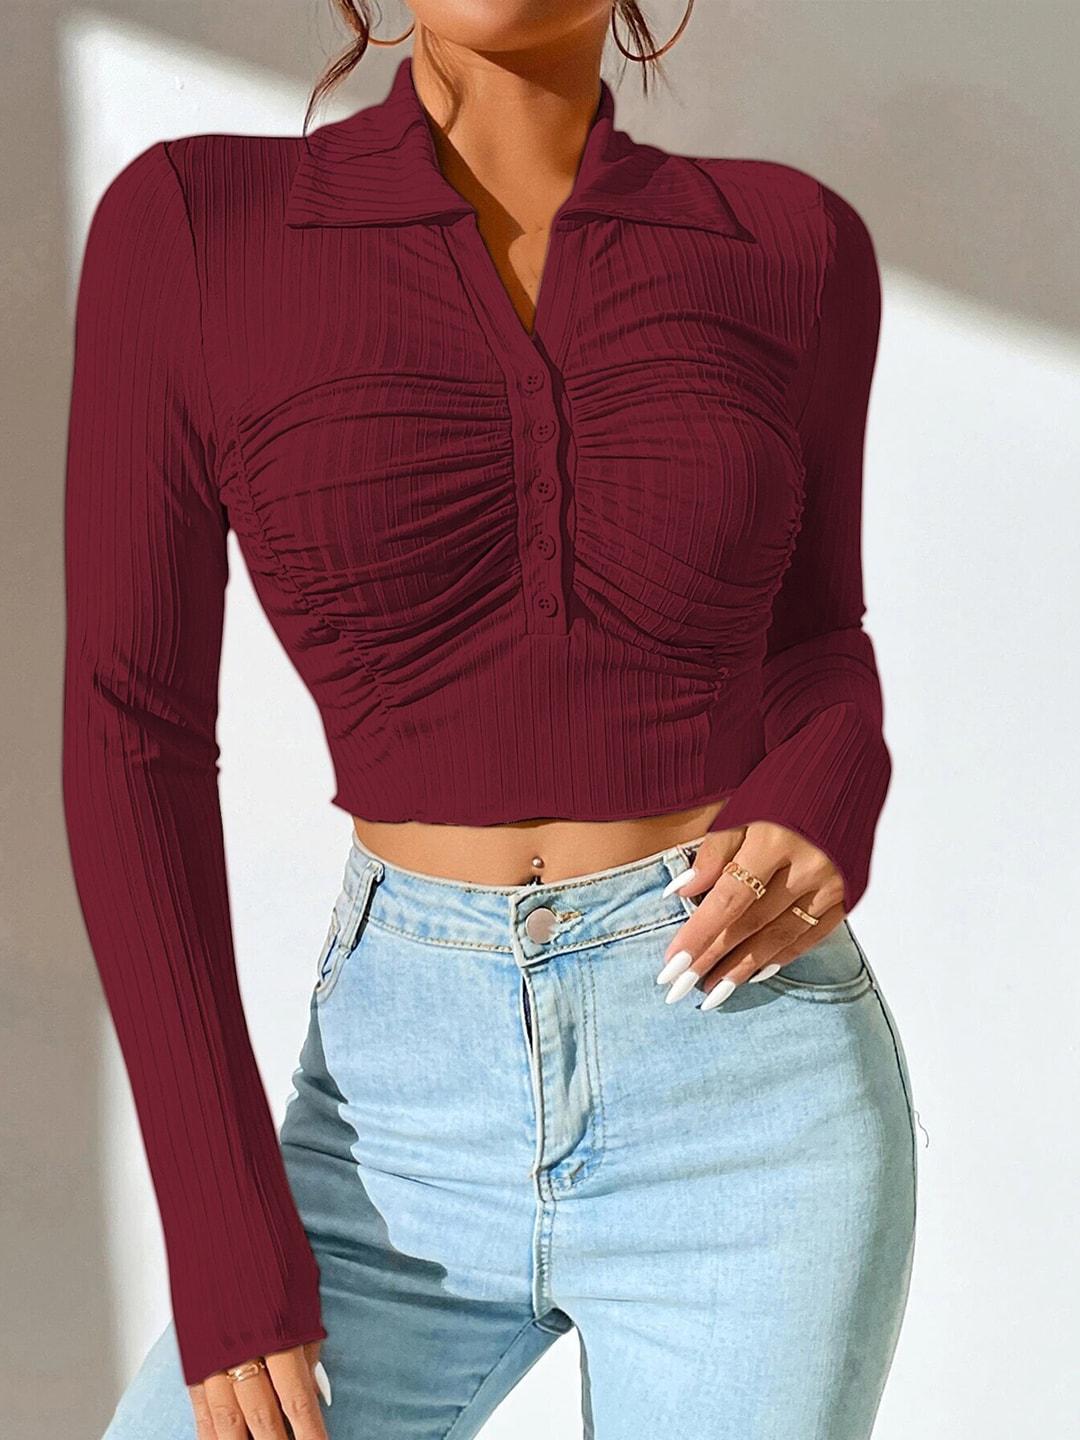 Slyck Maroon Striped Shirt Style Crop Top